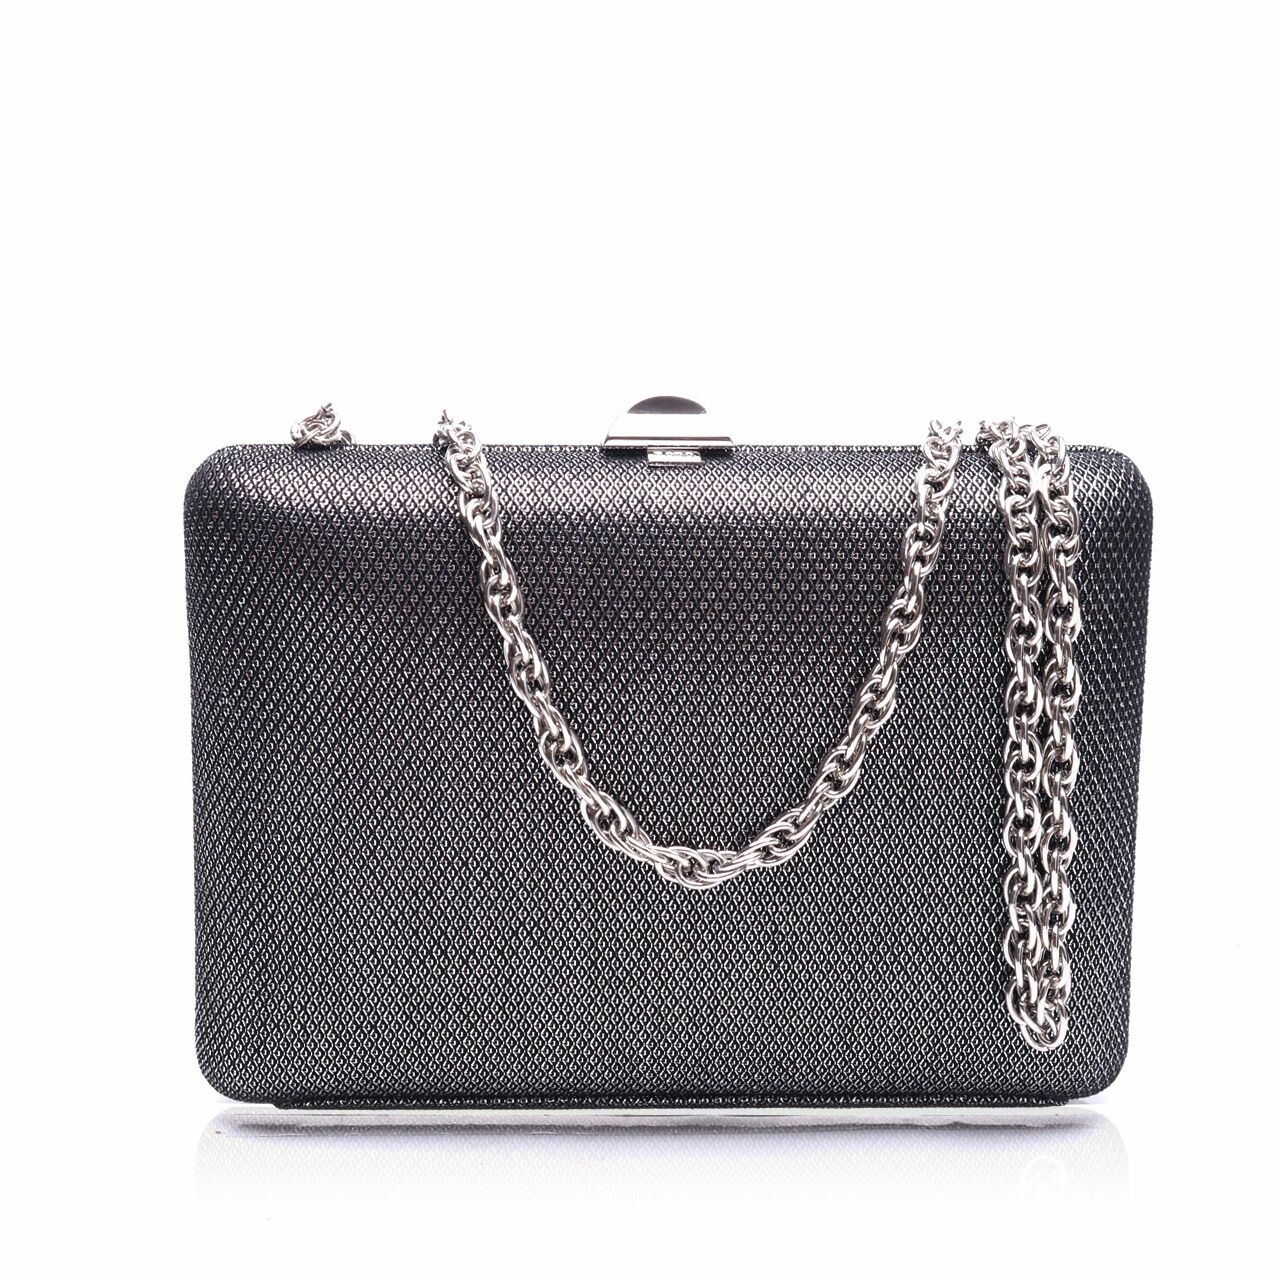 Rodo Fisher Black/Silver Clutch with Chain Strap Sling